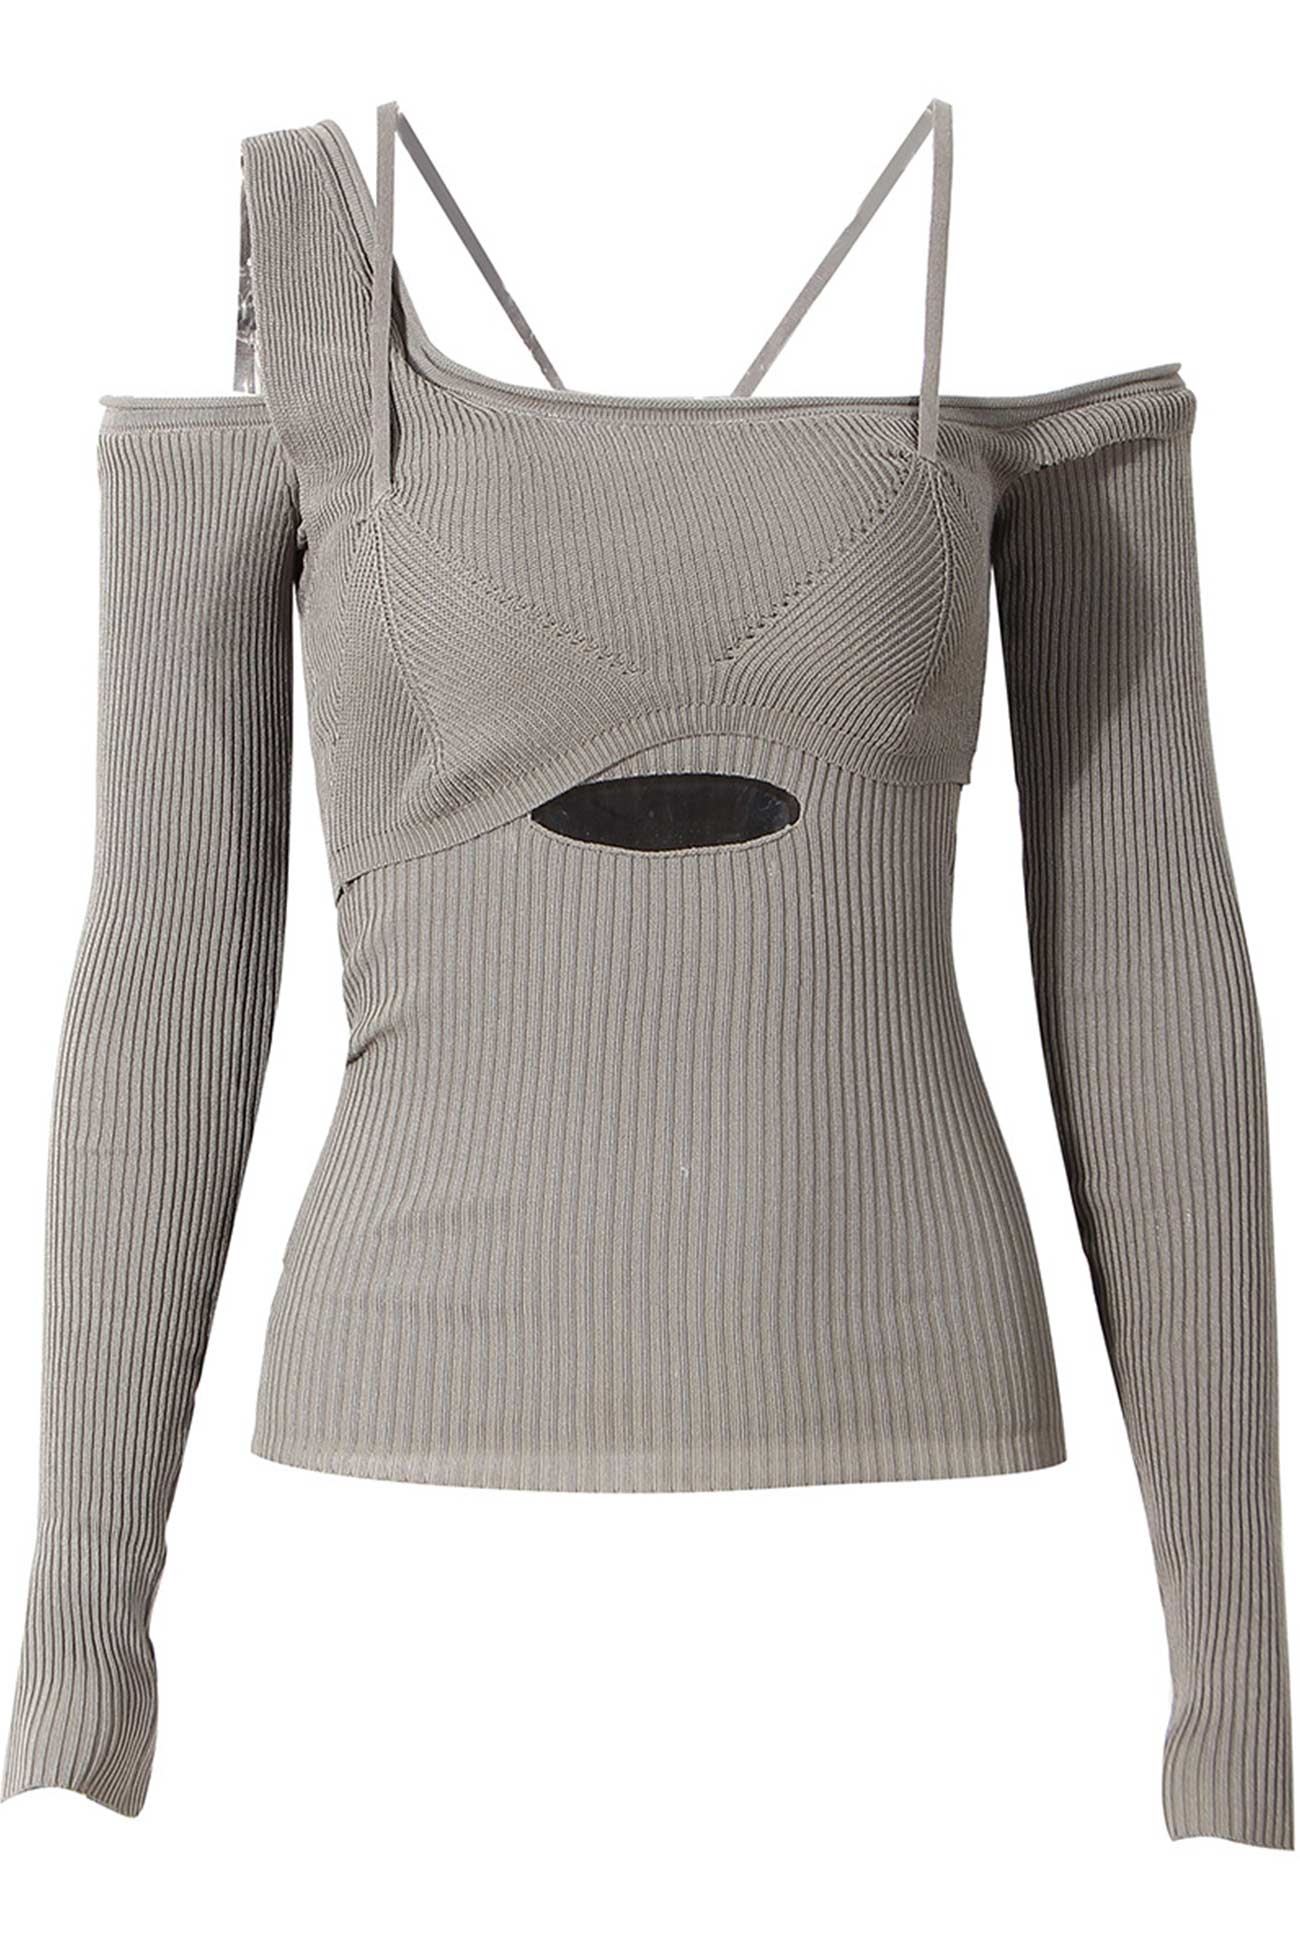 One Shoulder Irregular Cut-out Knitted Tops